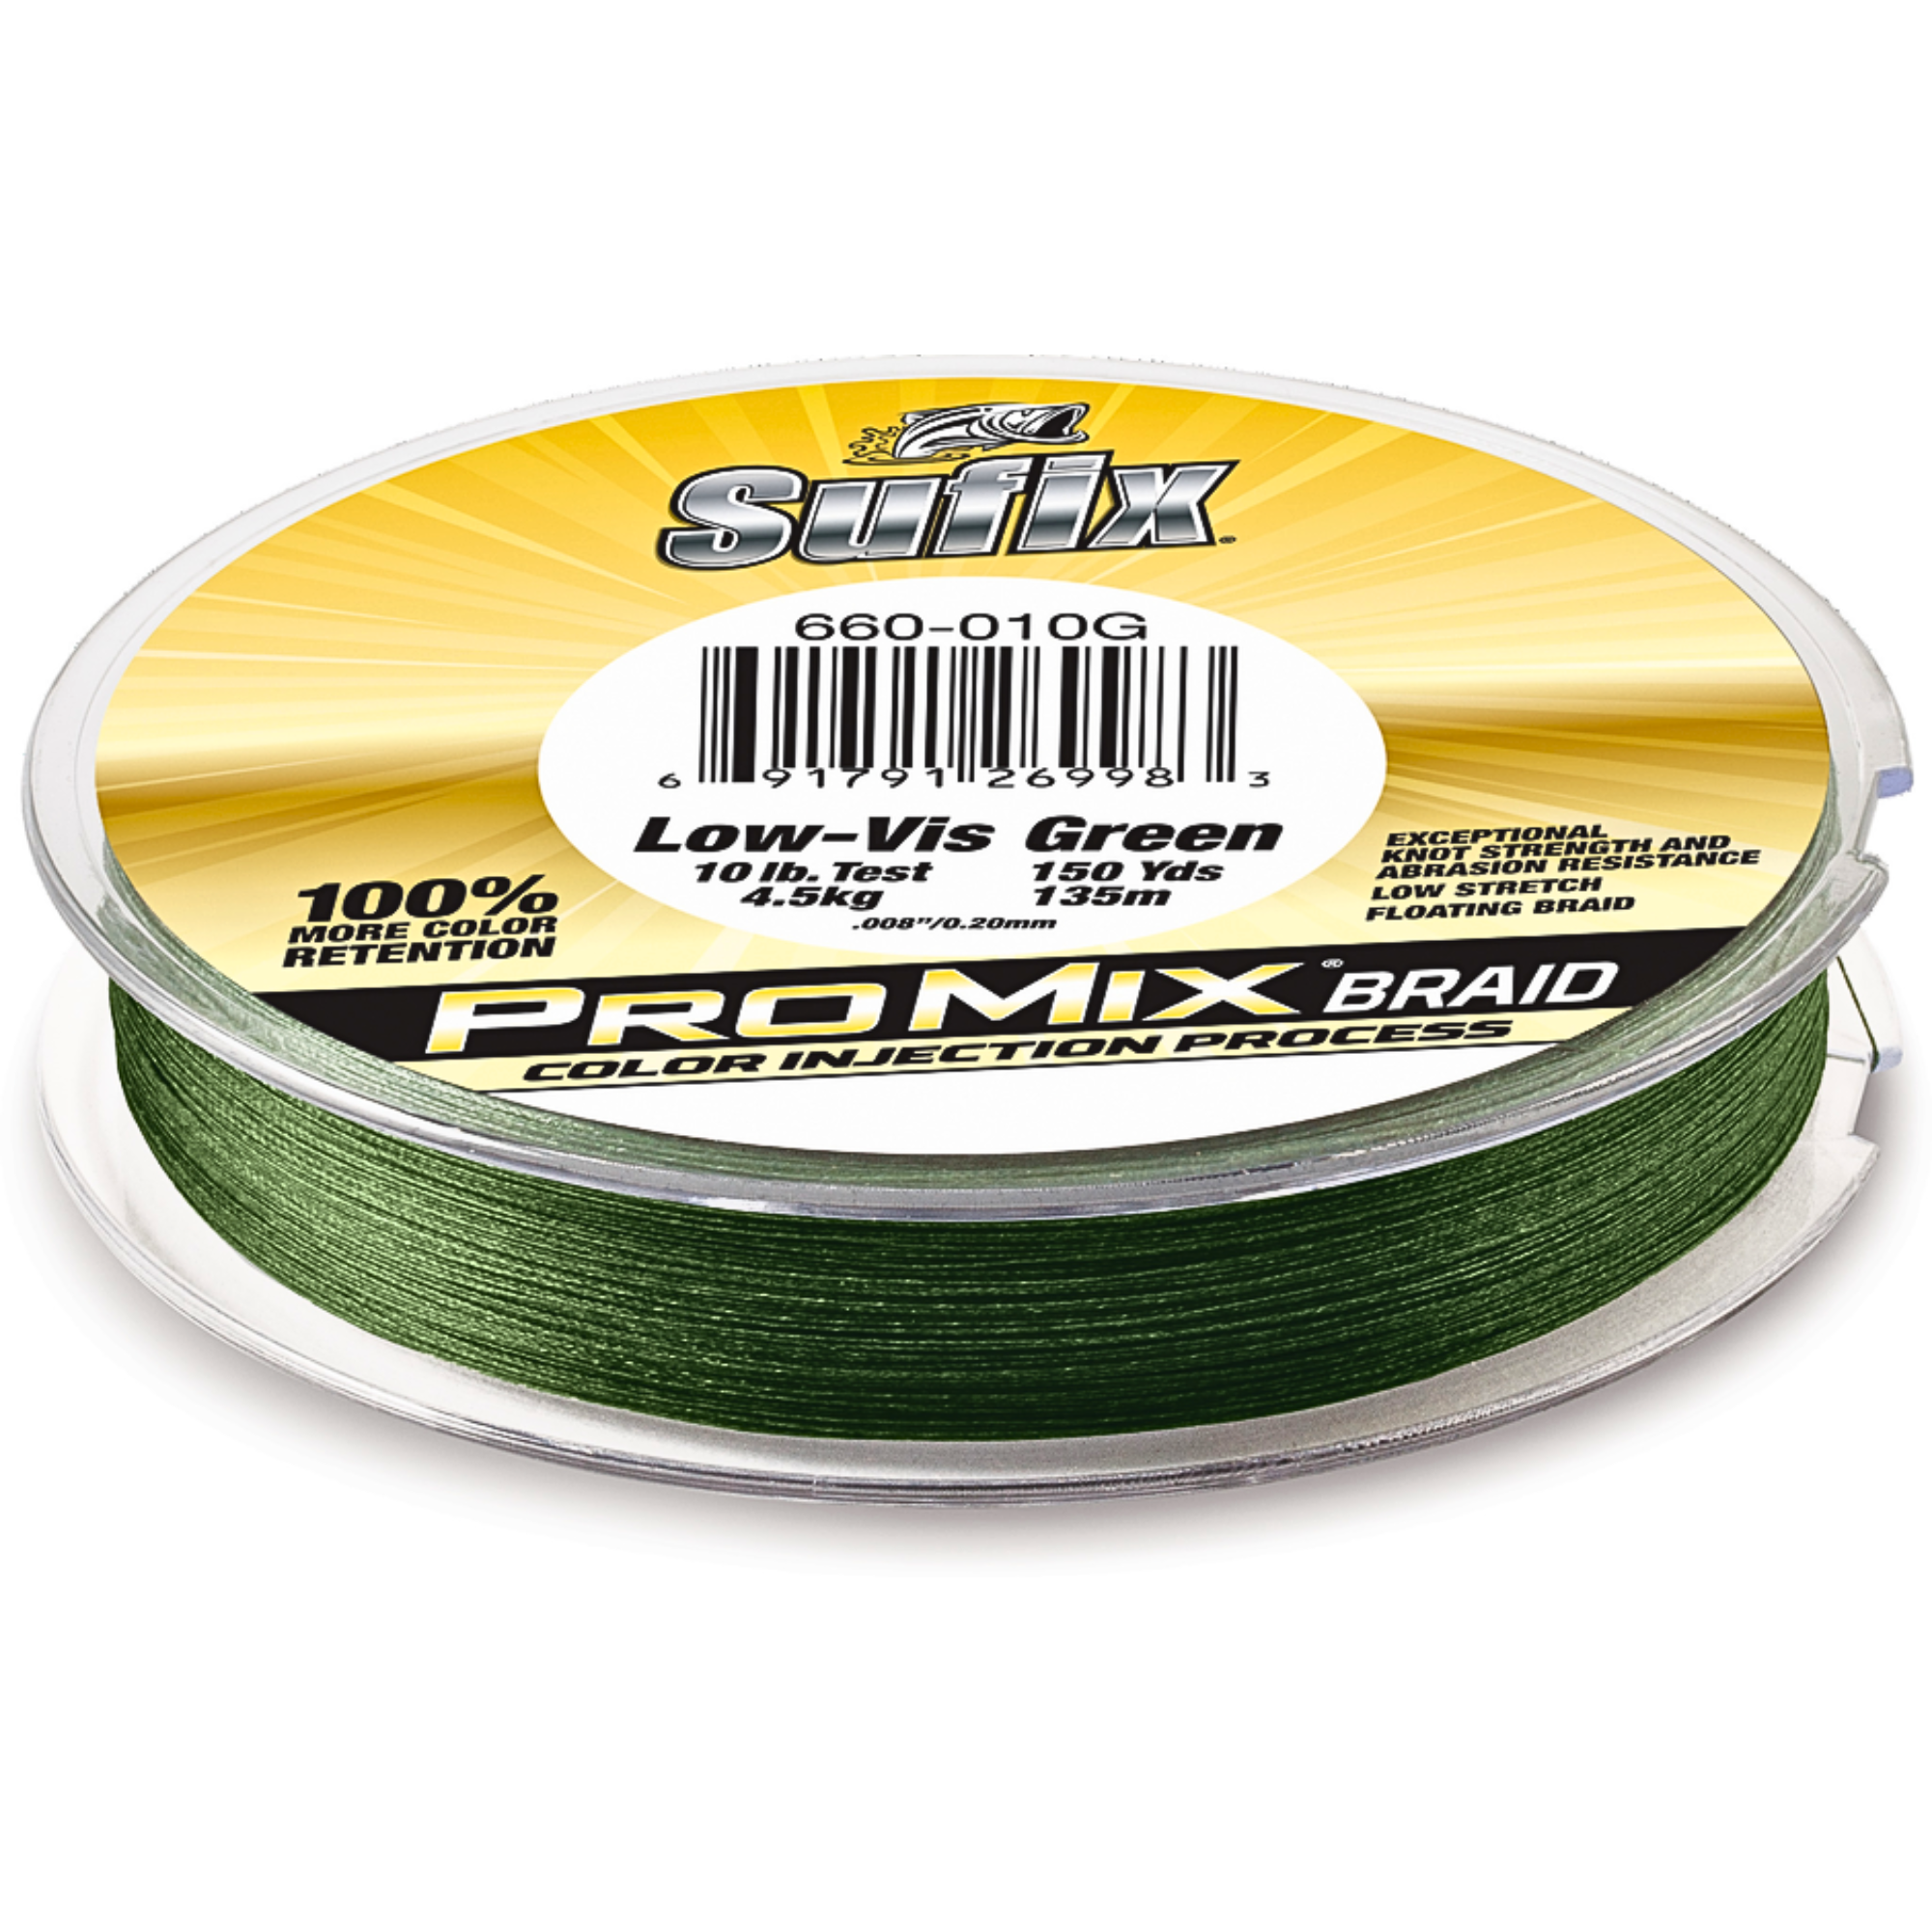 Promix Braid, Fishing Line, Color Injection Process